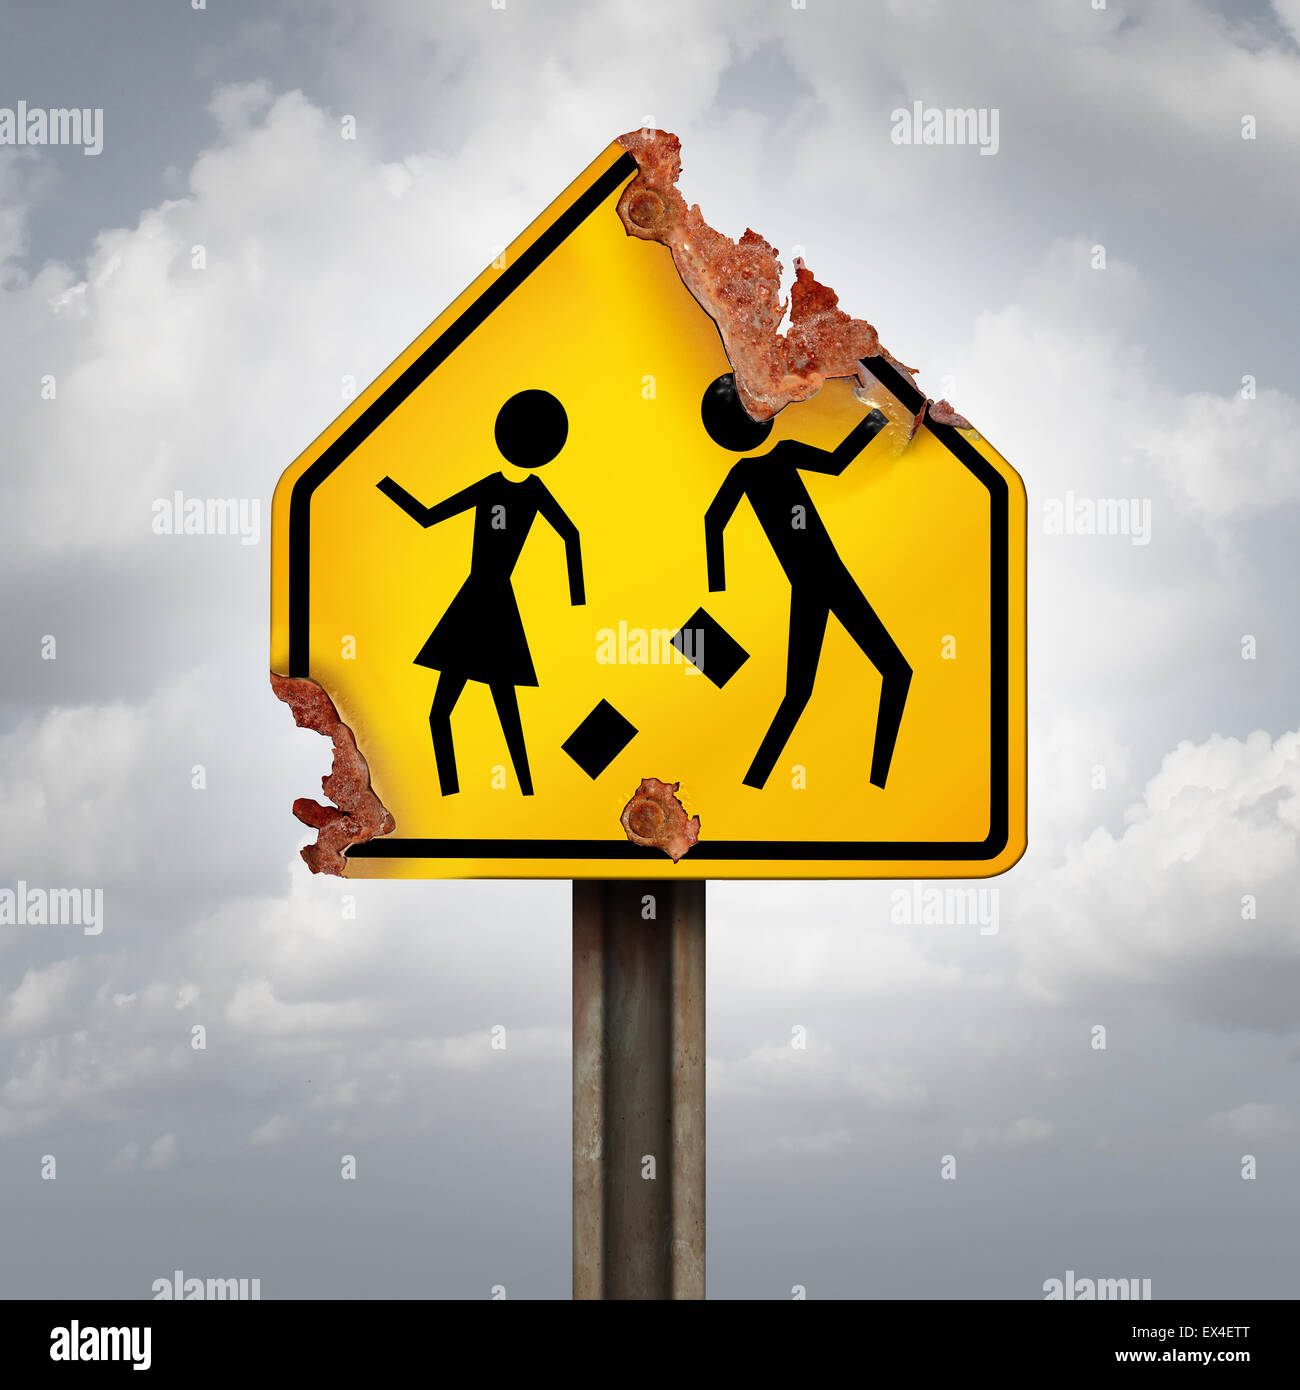 Education decline and neglected school problems concept as a rusted student crossing traffic sign as a symbol of negligence in public schools and teaching or funding challenges for special learning and literacy programs. Stock Photo